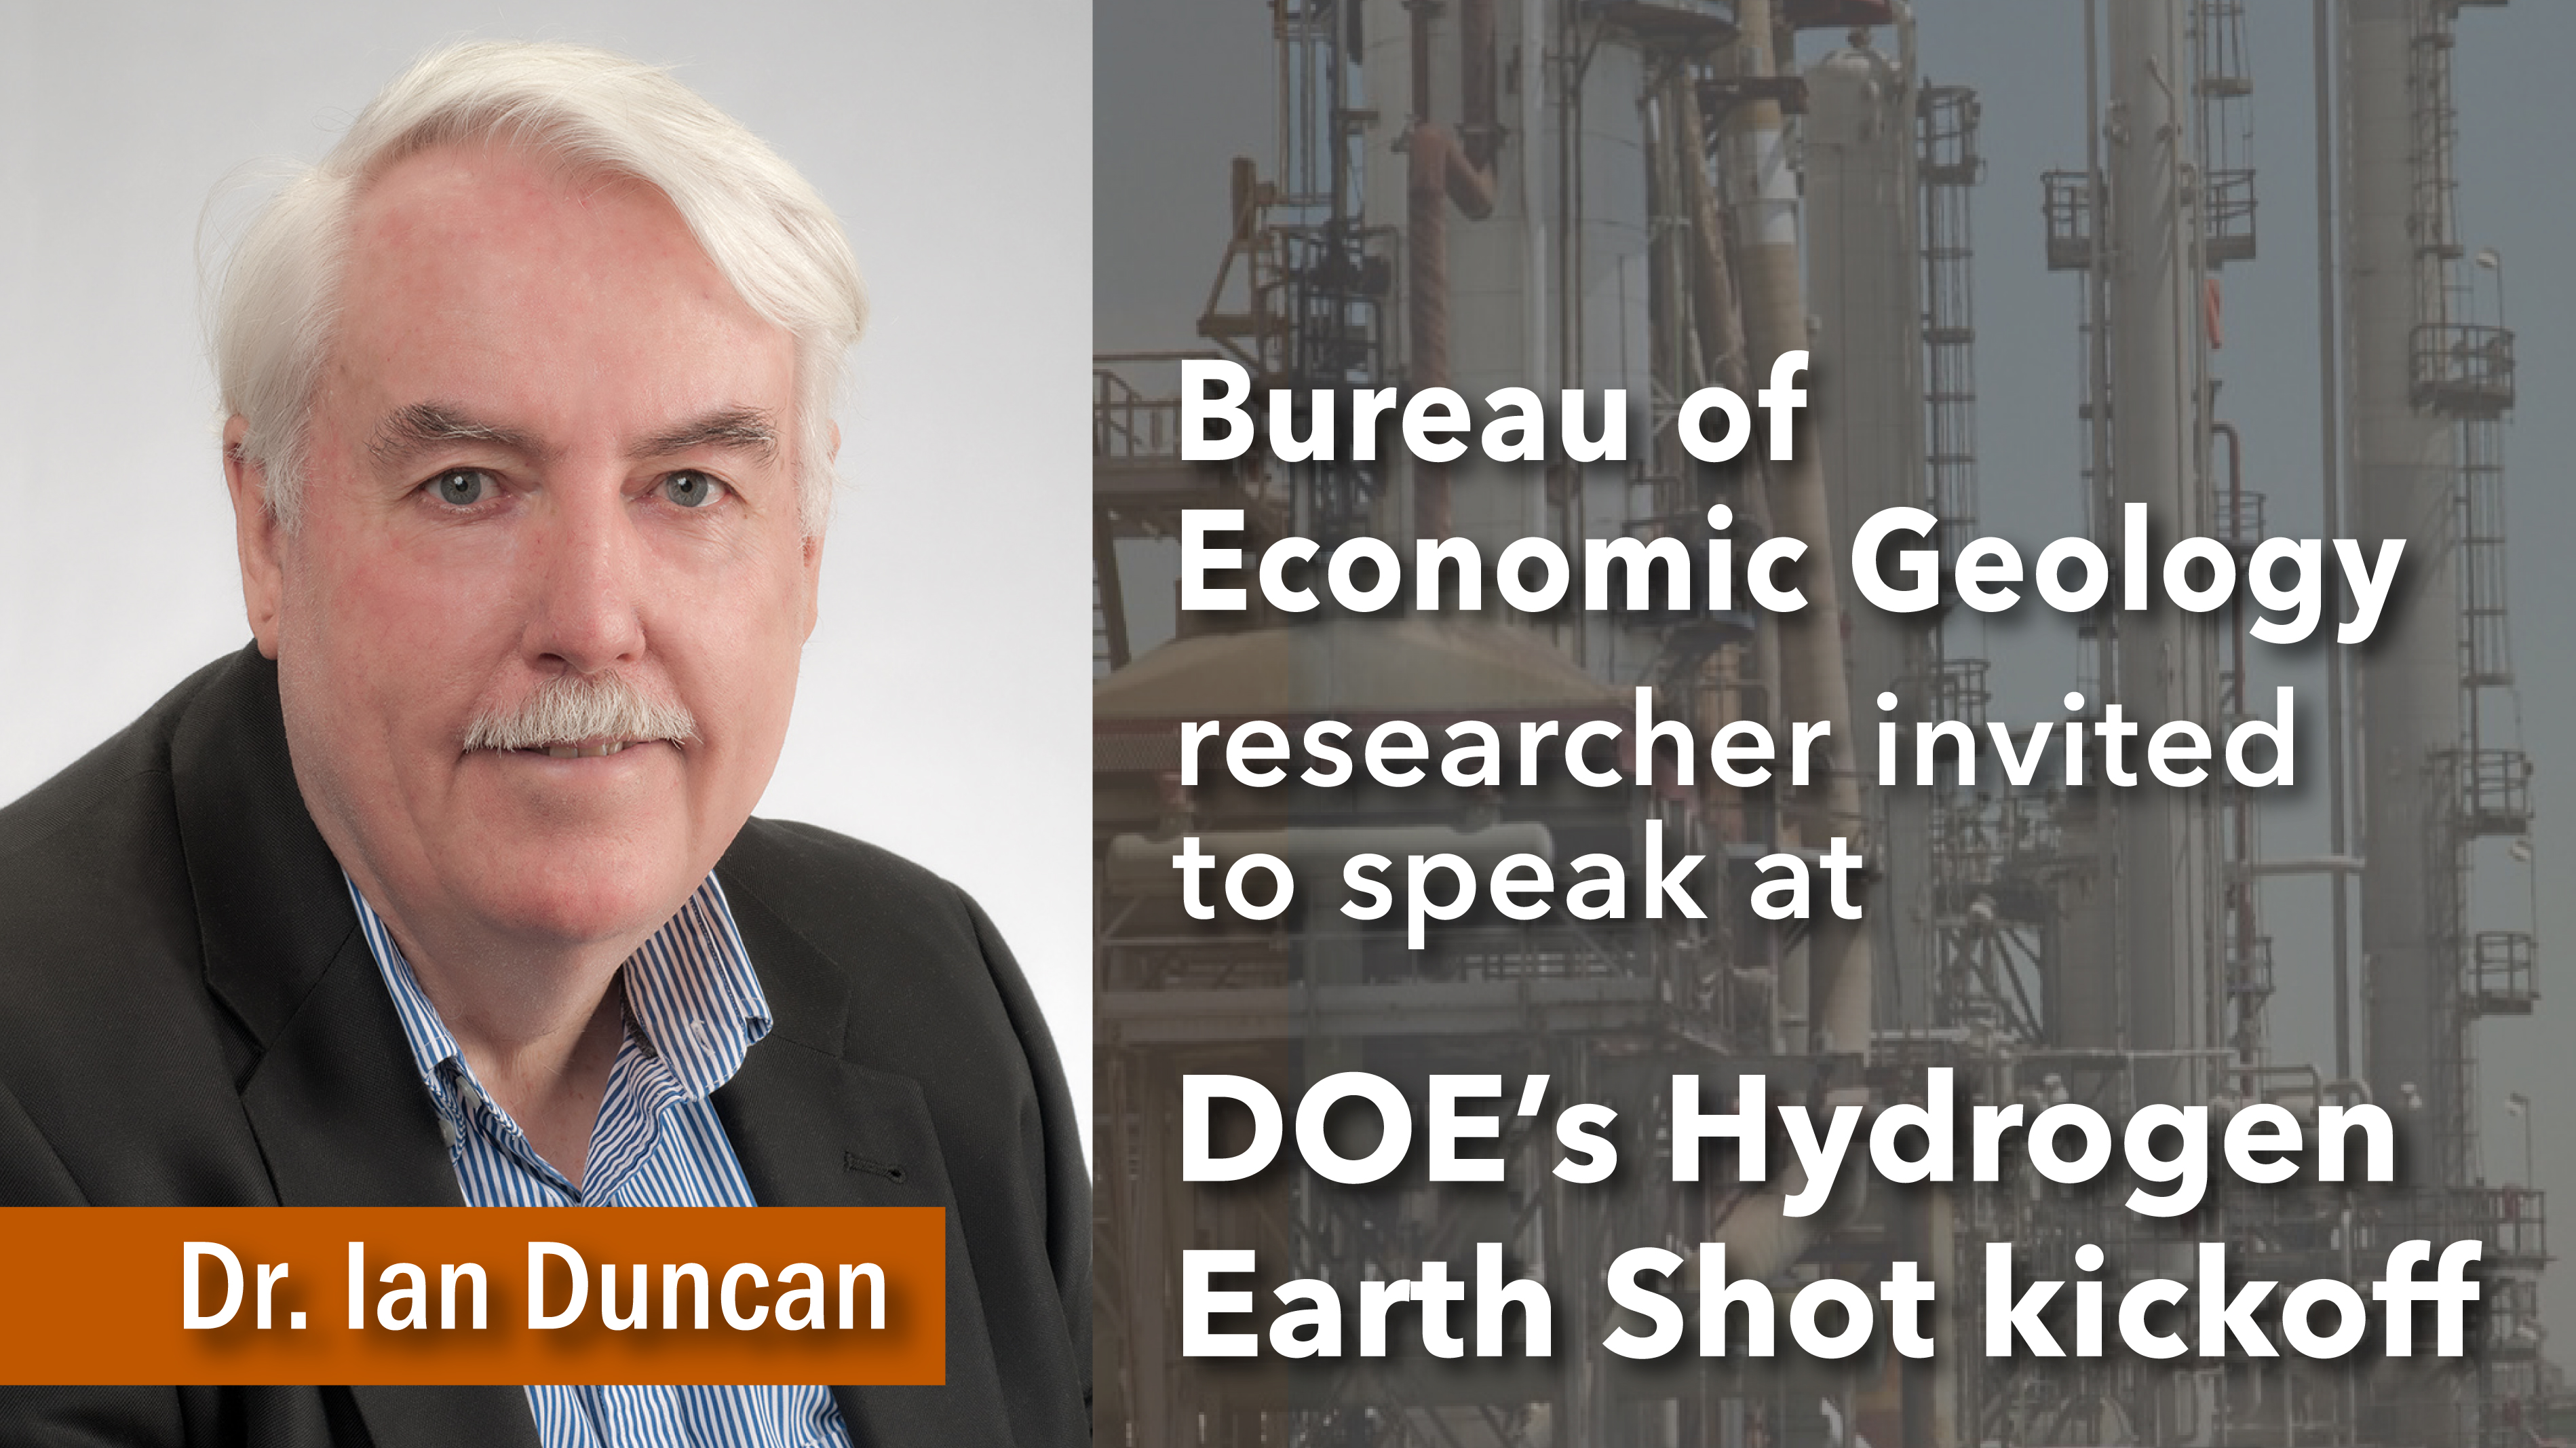 Bureau of Economic Geology Researcher Invited to Speak at the Department of Energy’s Energy Earthshot Kickoff